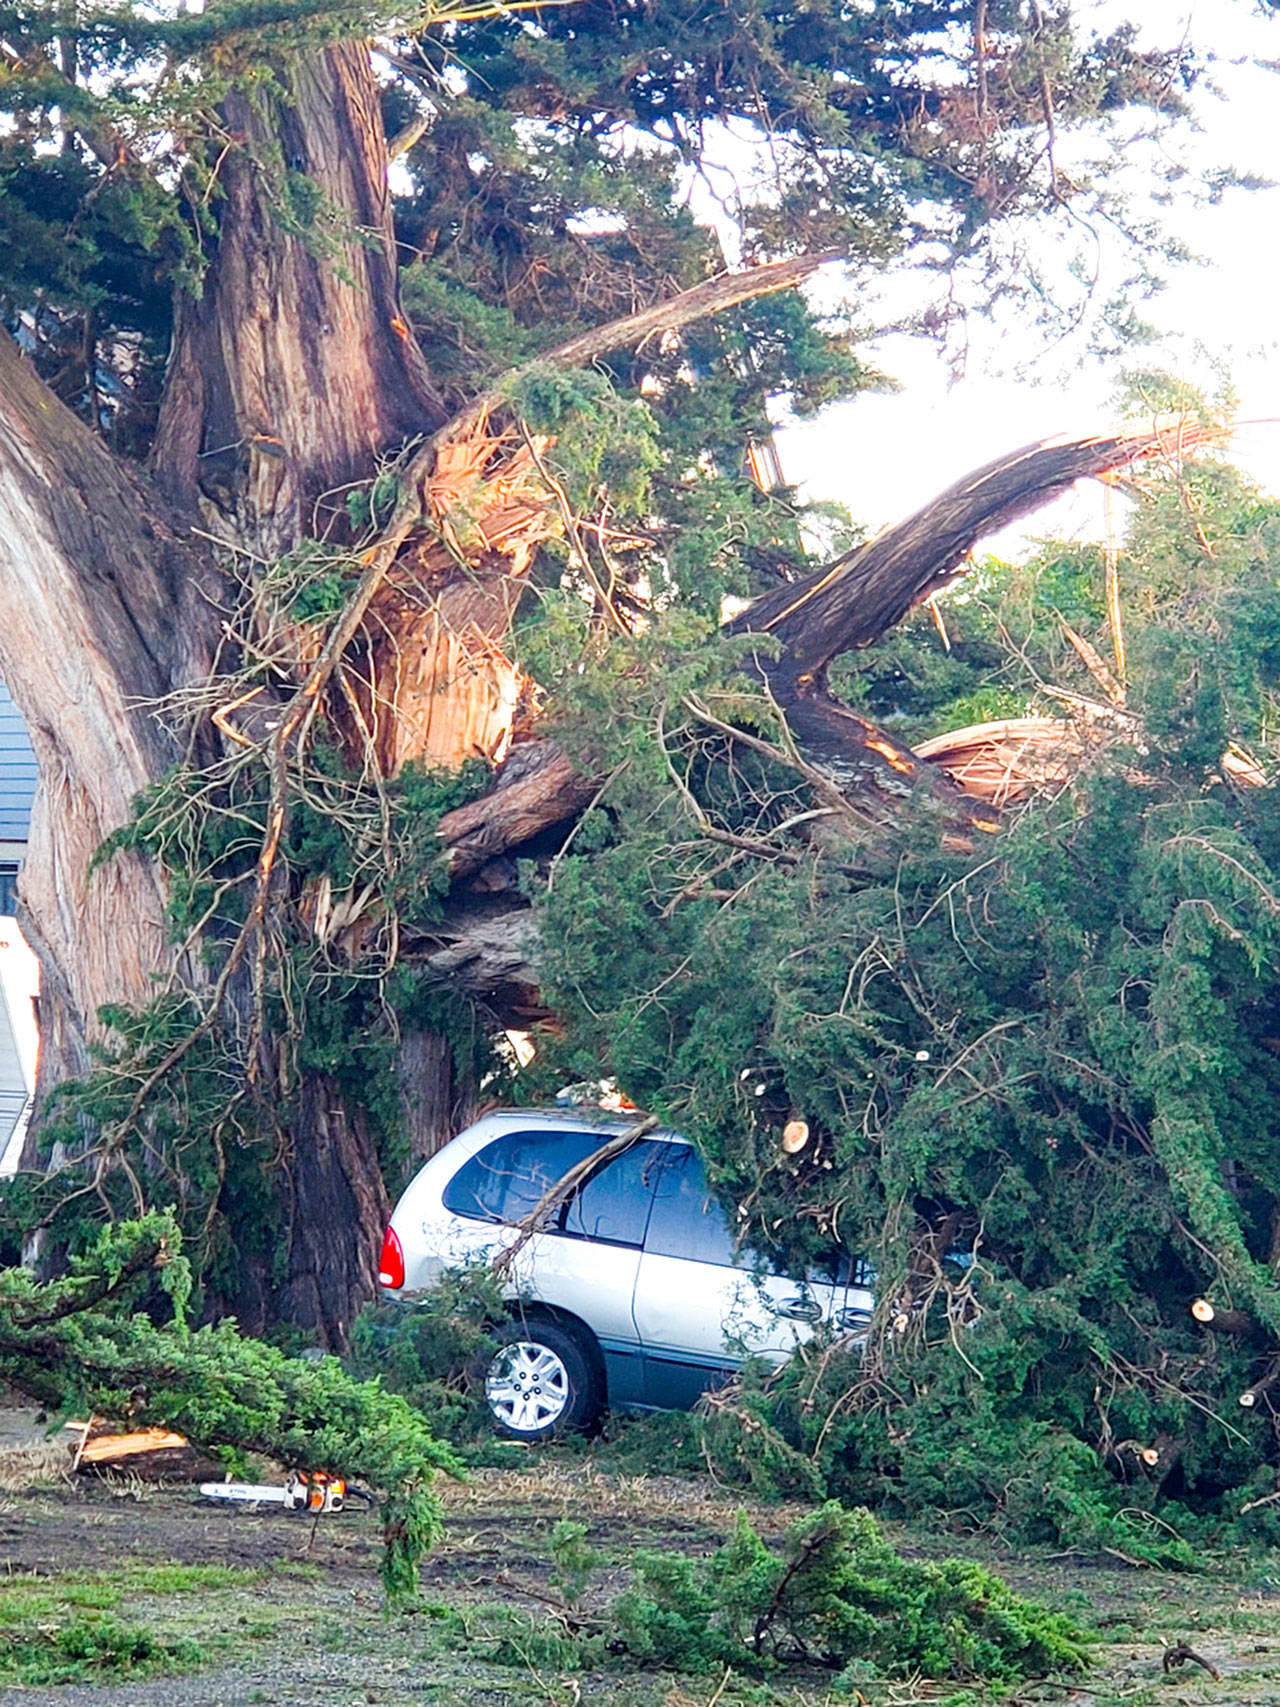 A 150-year old Monterey cypress on Clay Street split Friday night and caused damage to 3 vehicles parked under it and across the street. Port Townsend city crews hauled 12 dump trucks of wood from the scene. (Kevin Mason)